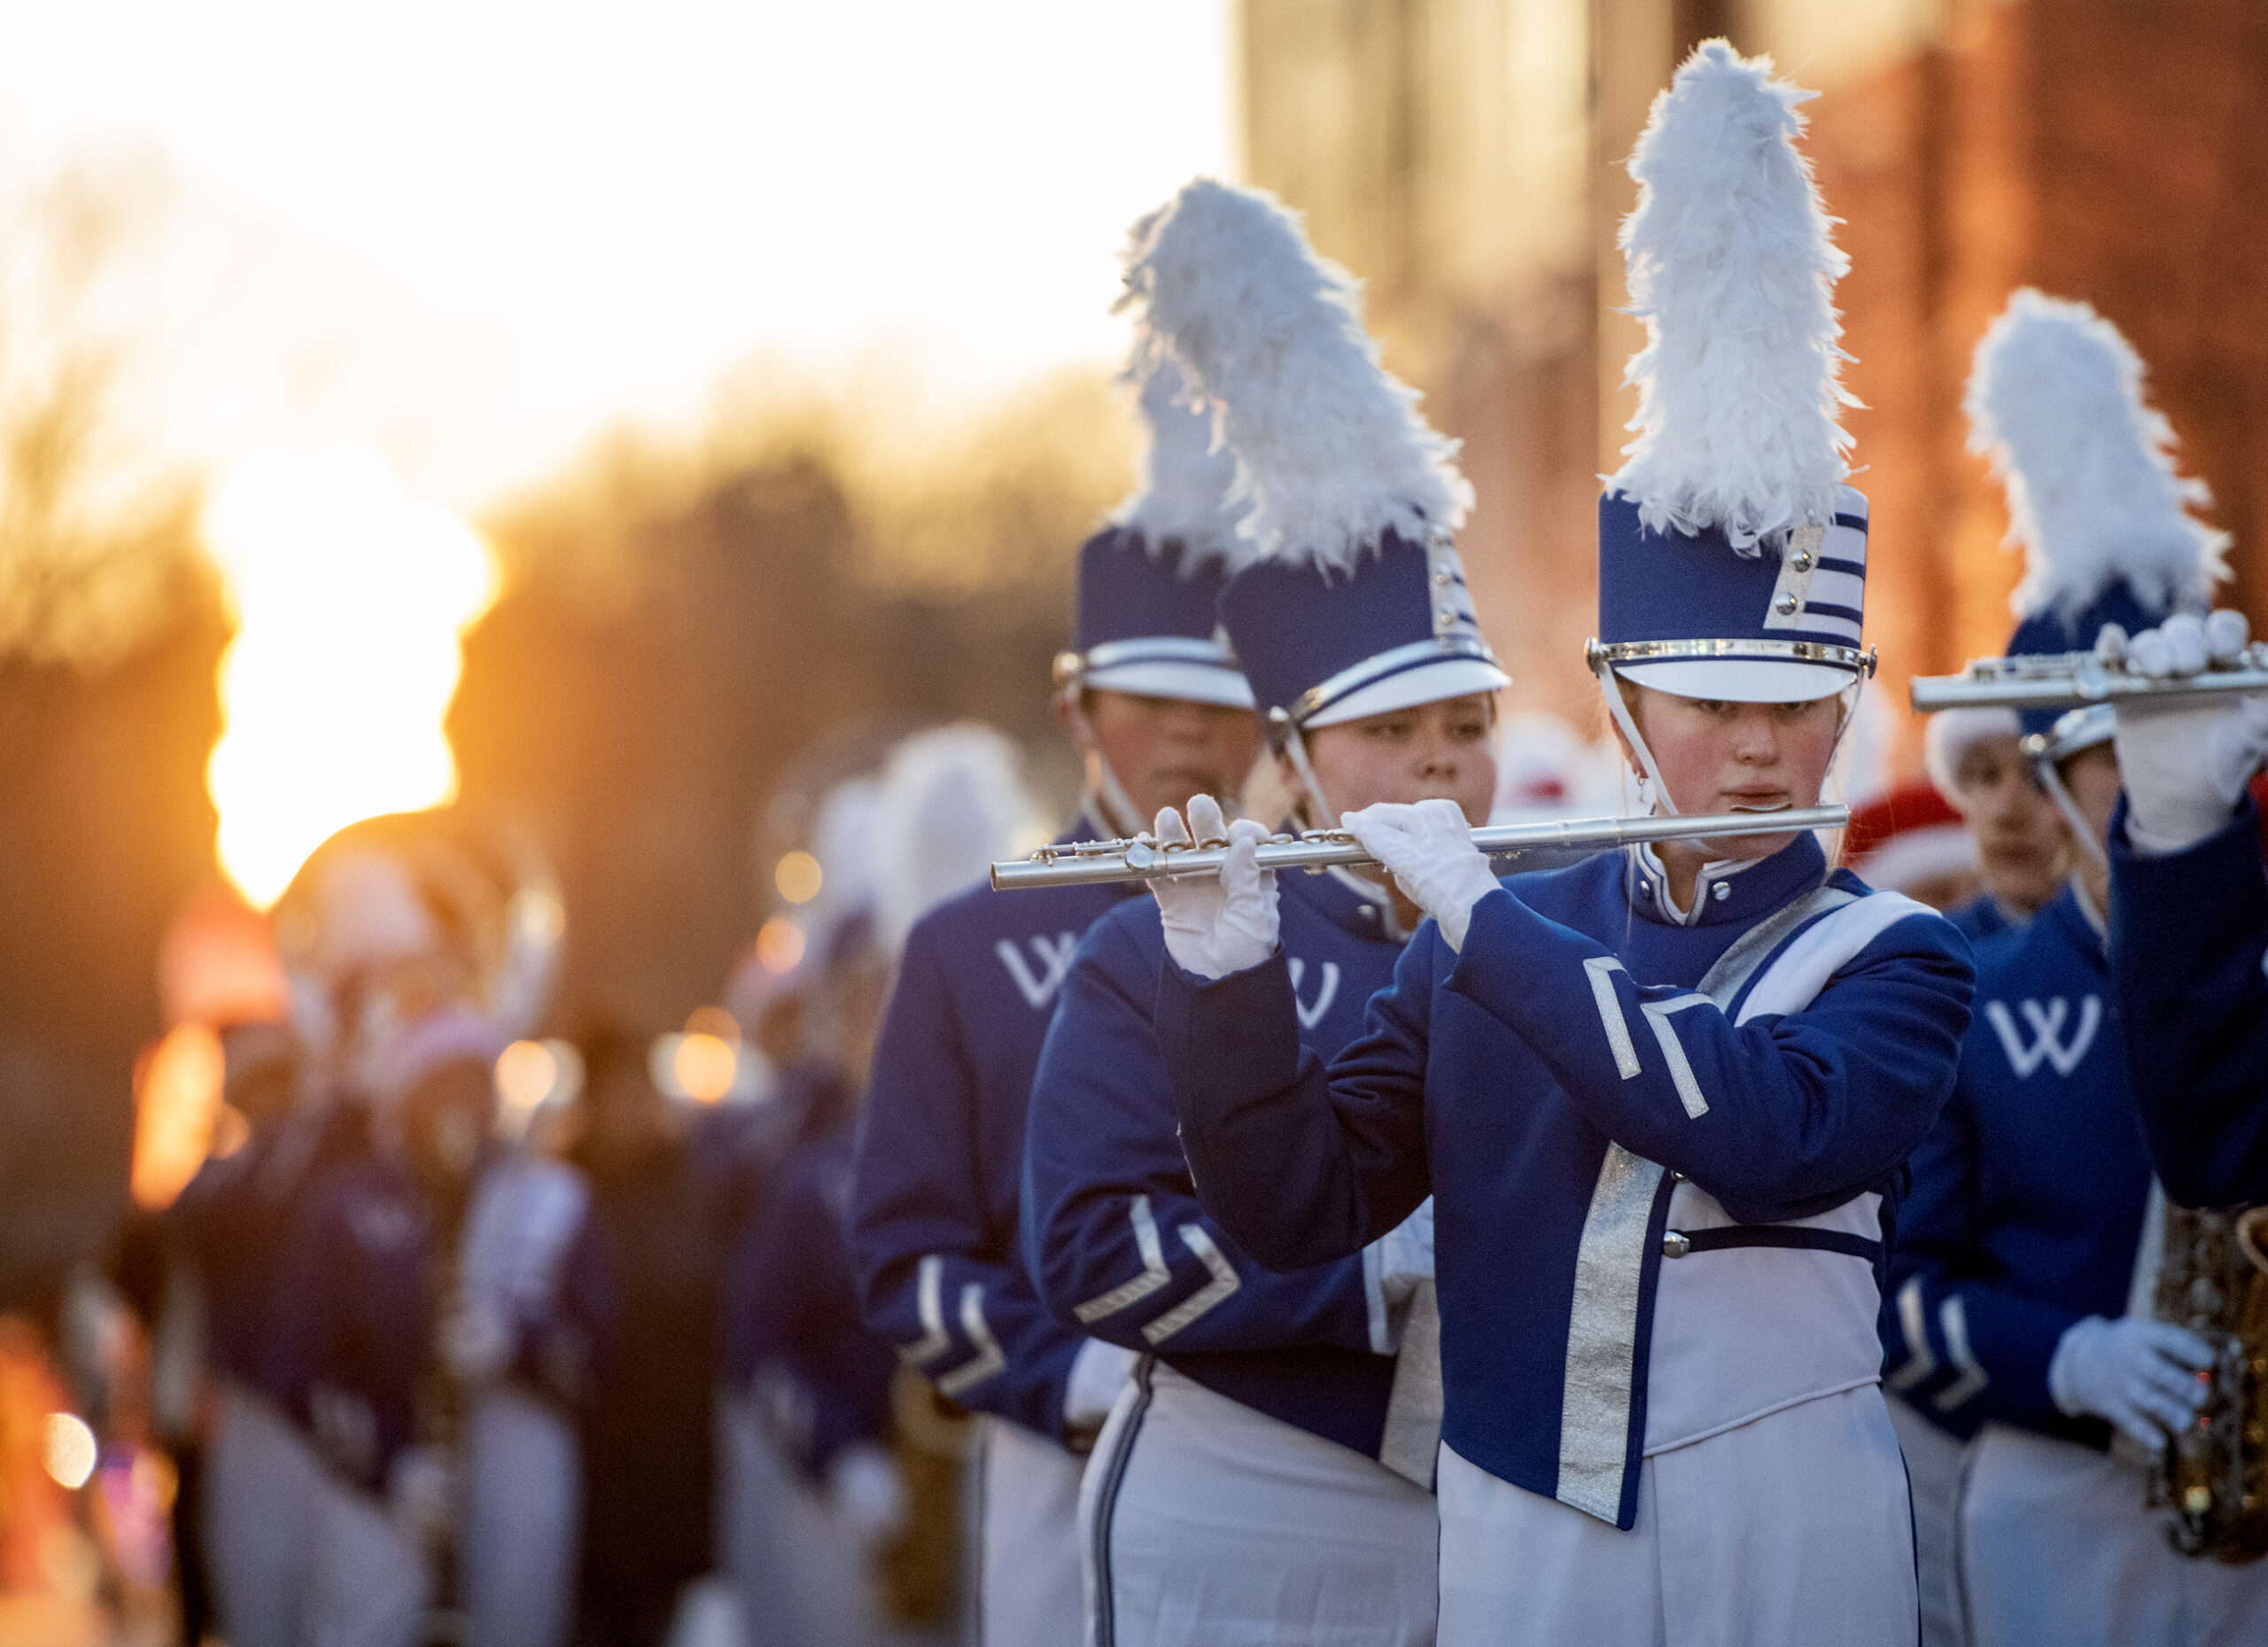 Band members in blue and white uniforms play instruments as the sun sets.